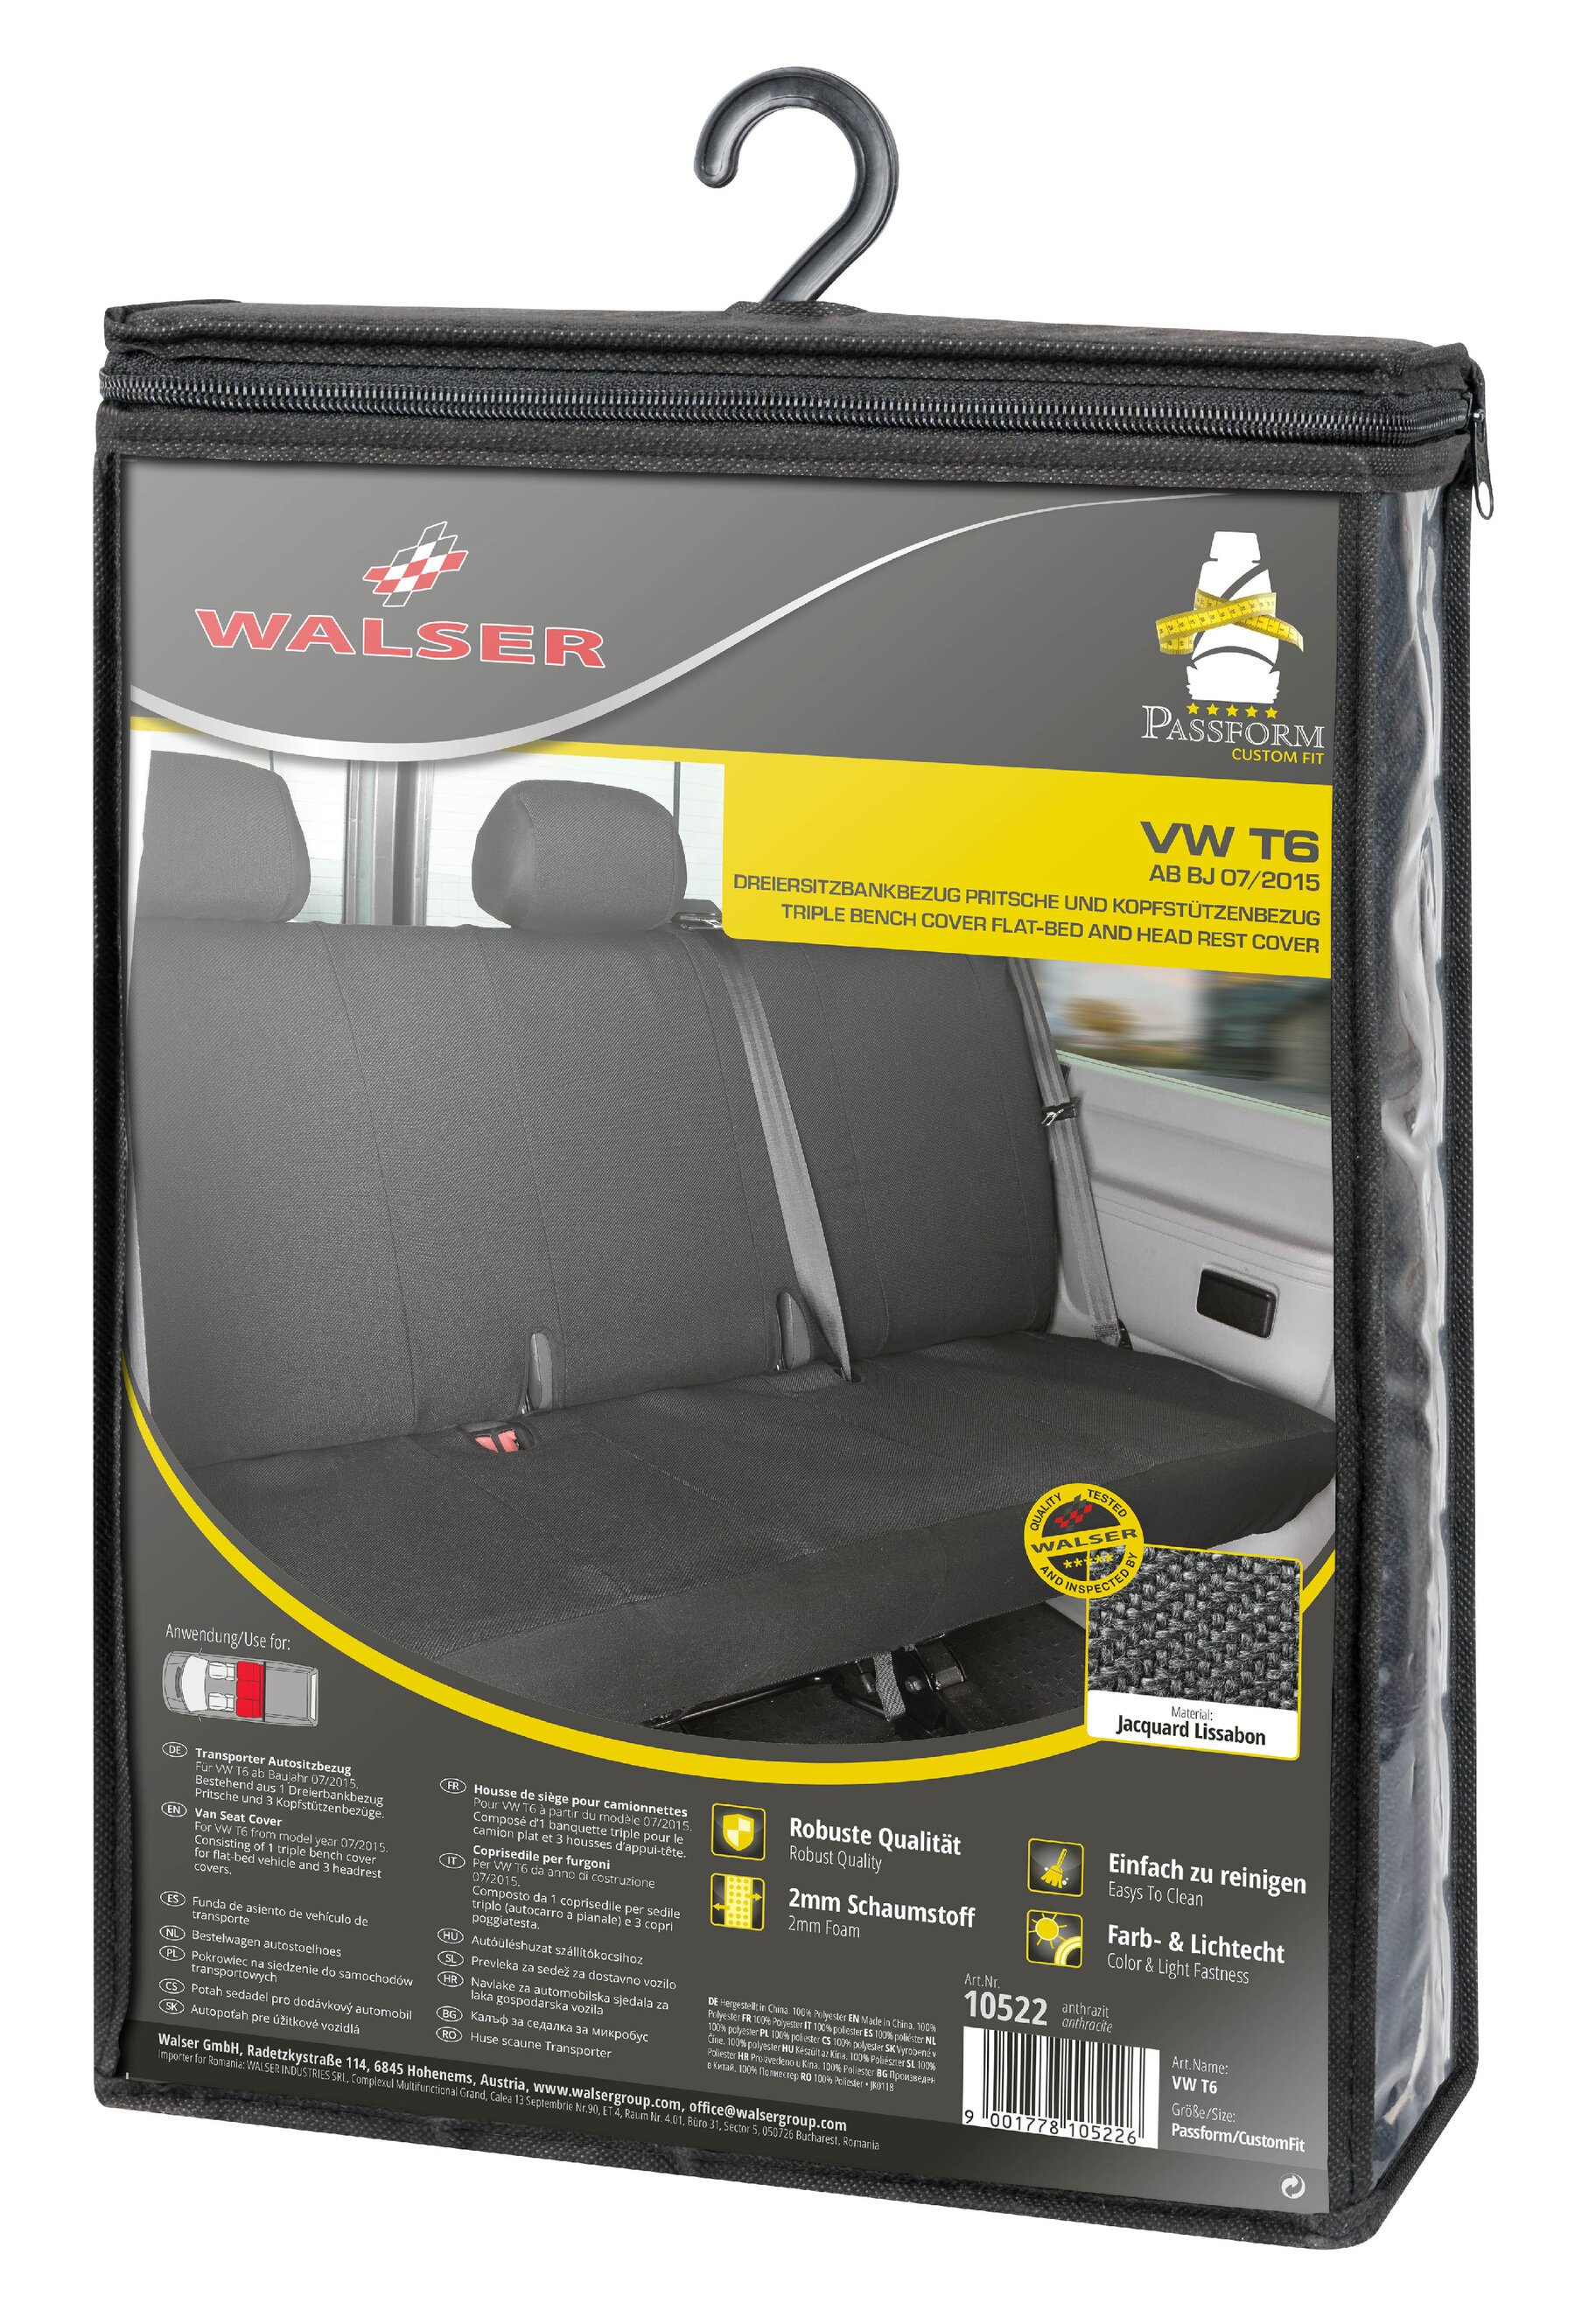 Car Seat cover Transporter made of fabric for VW T6, 3-seater bench platform